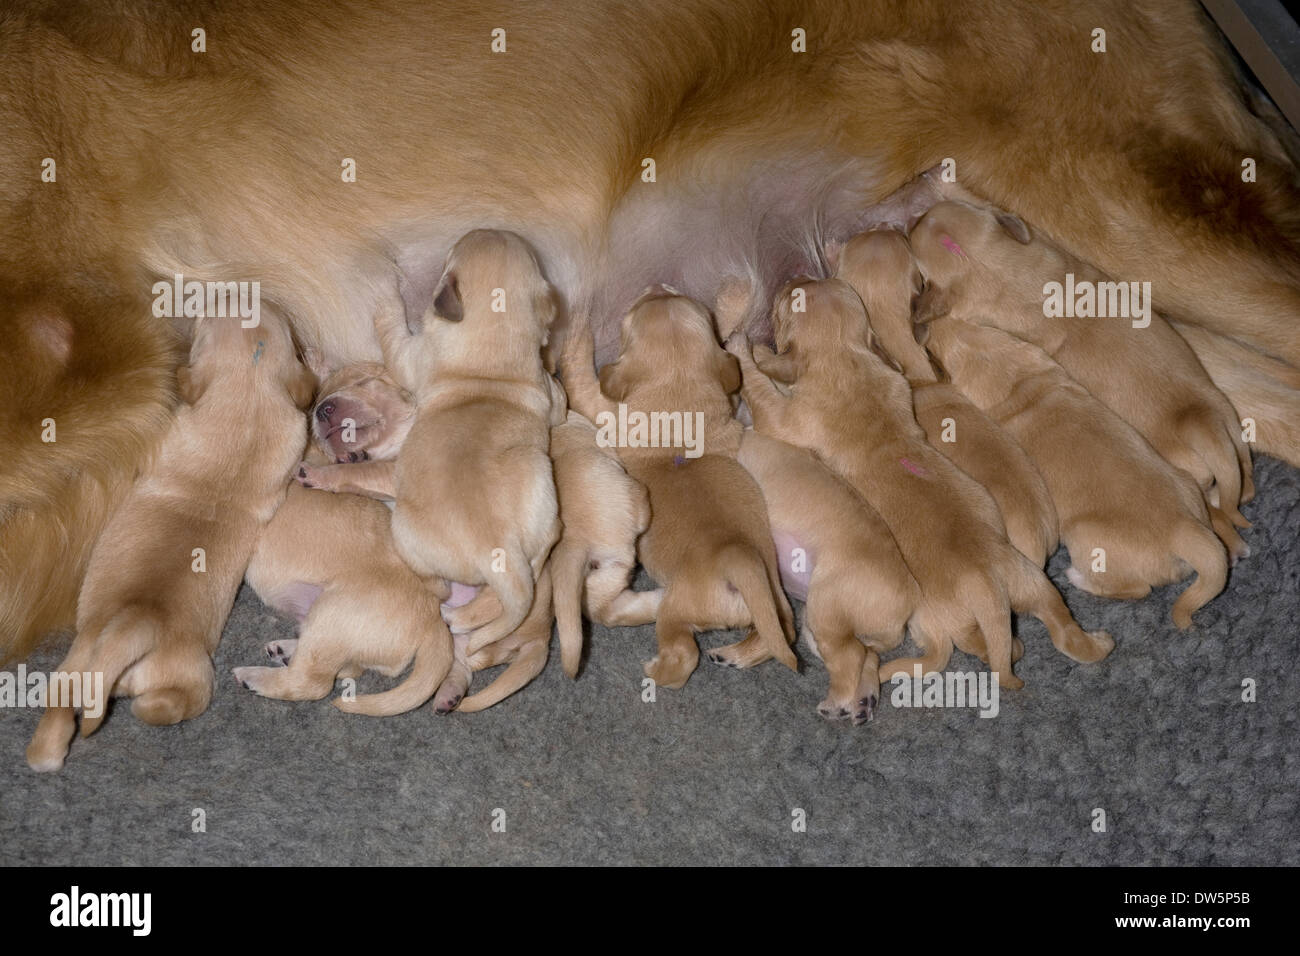 Golden retriever, one week old, puppies, suckling, mother, happiness, contentment Stock Photo